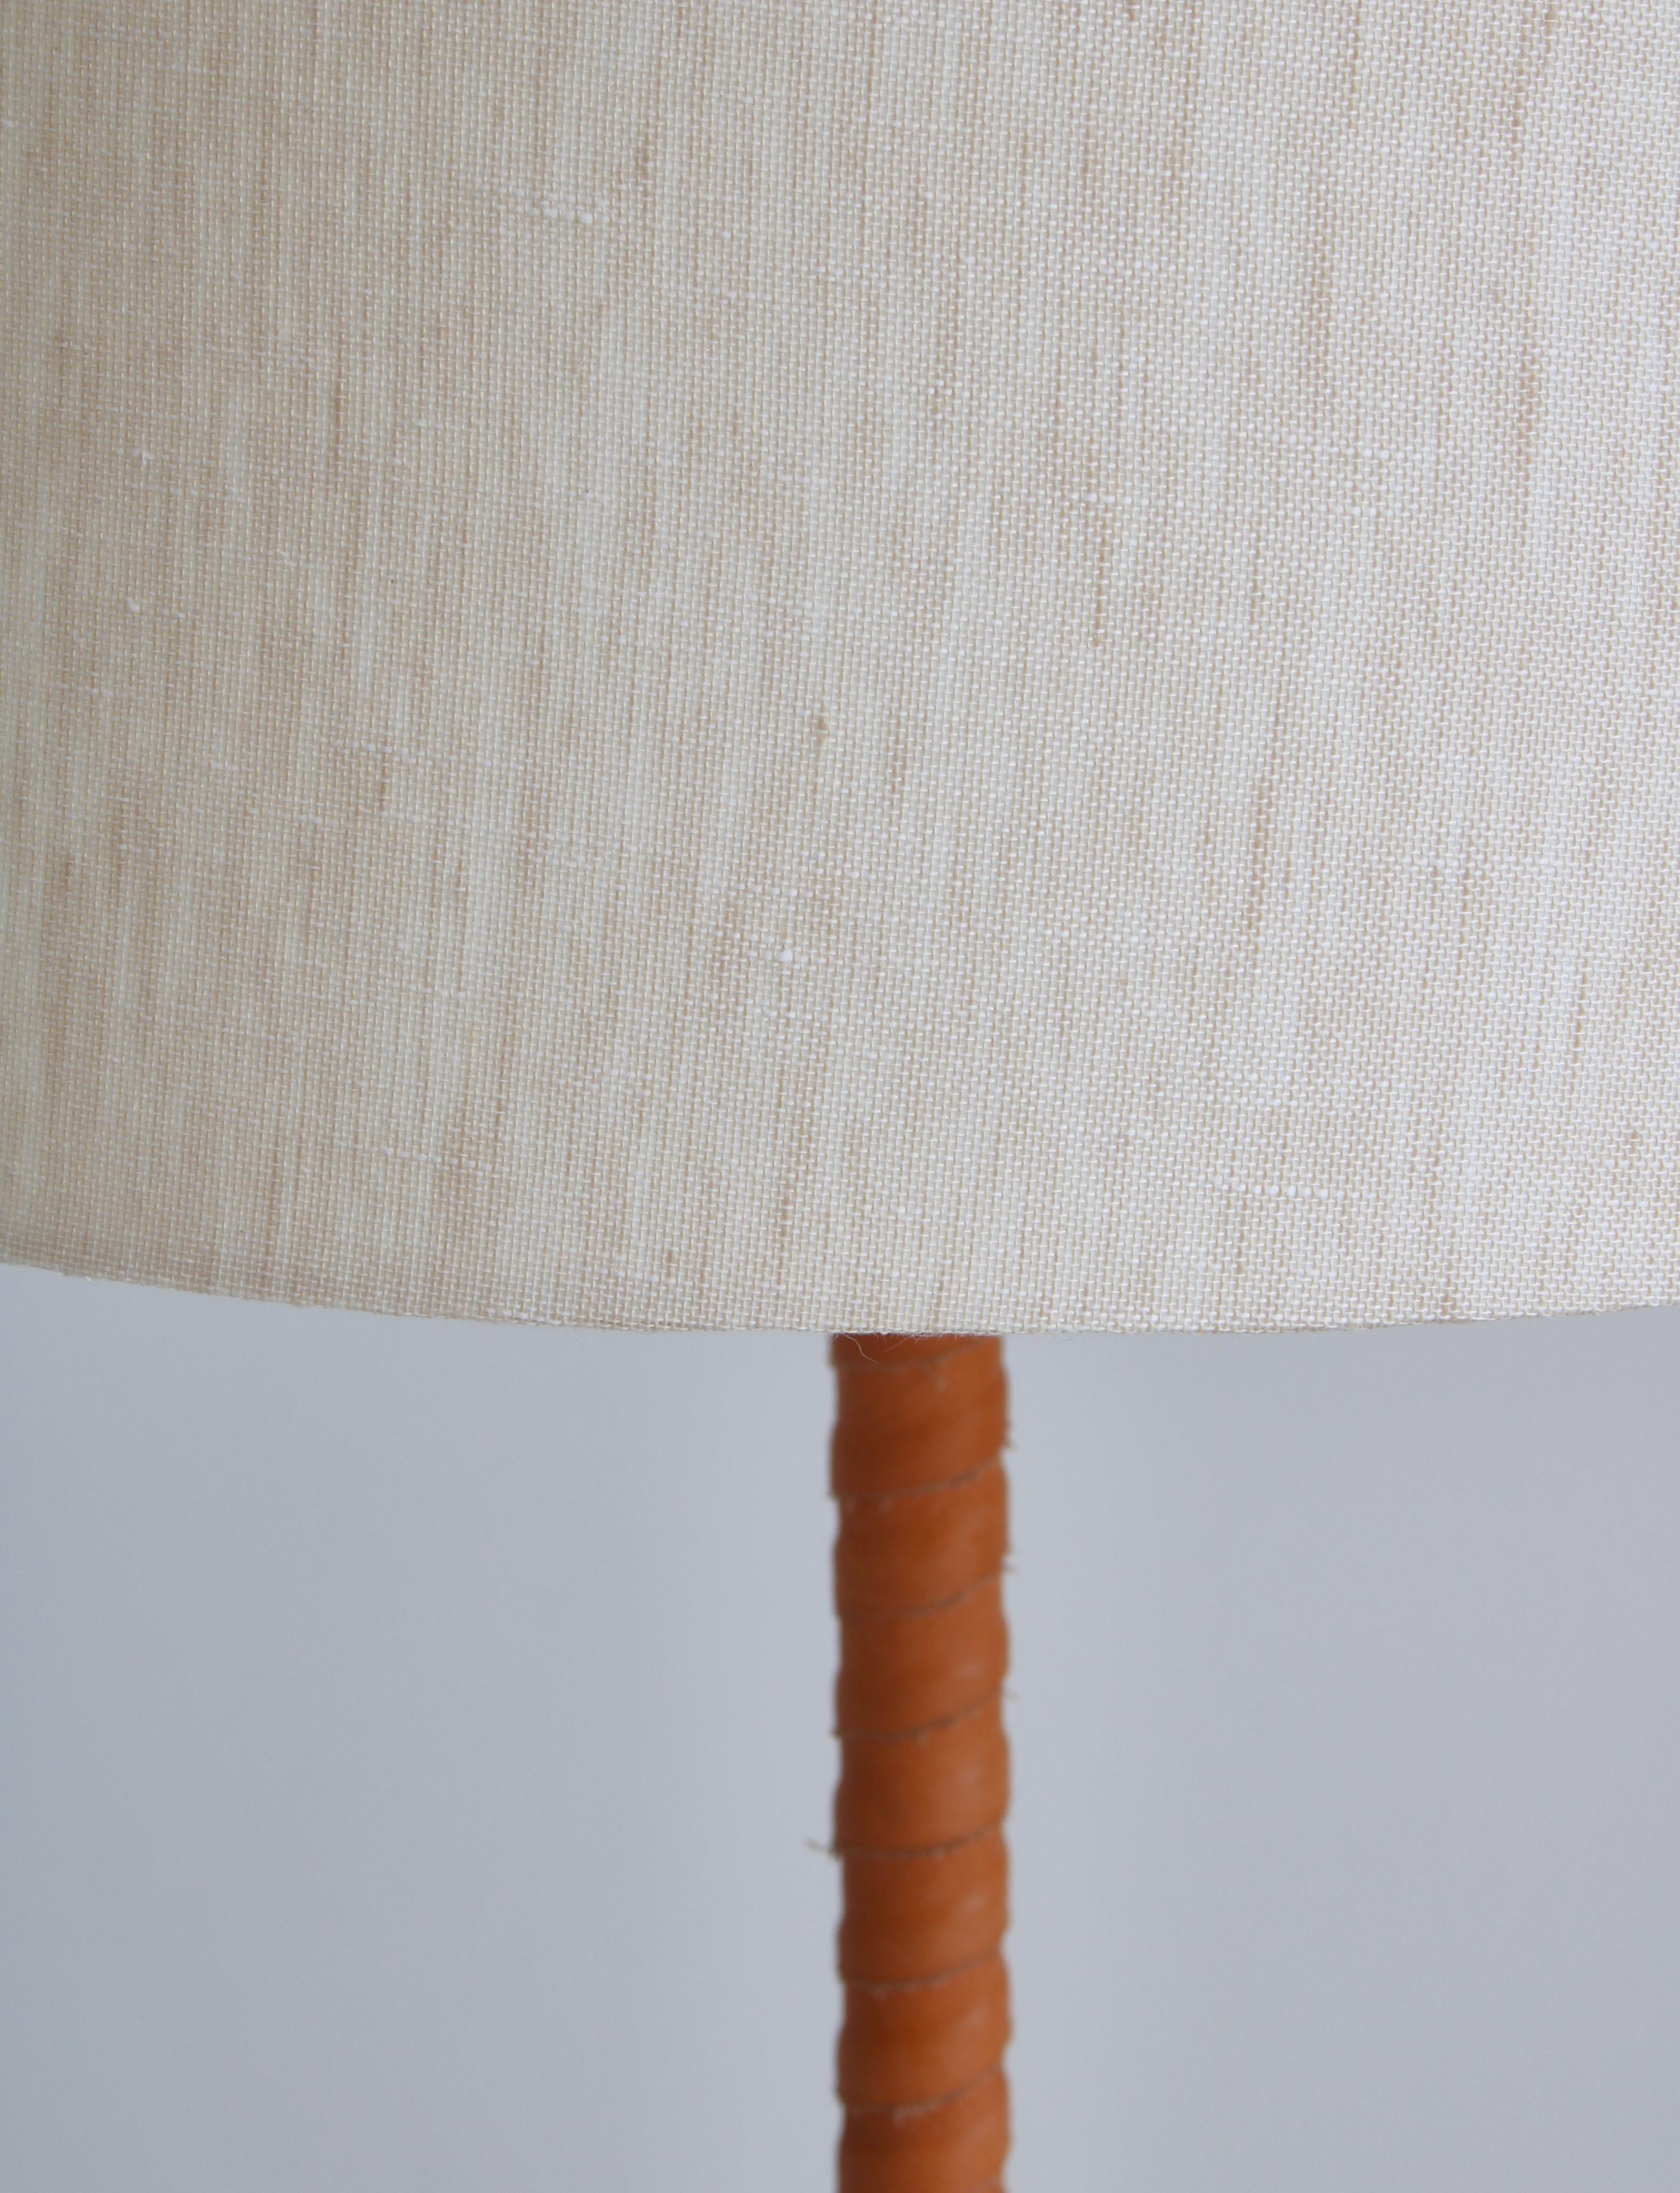 Finnish 1950s Floor Lamp by Lisa Johansson-Pape in Brass and Leather for ORNO, Finland